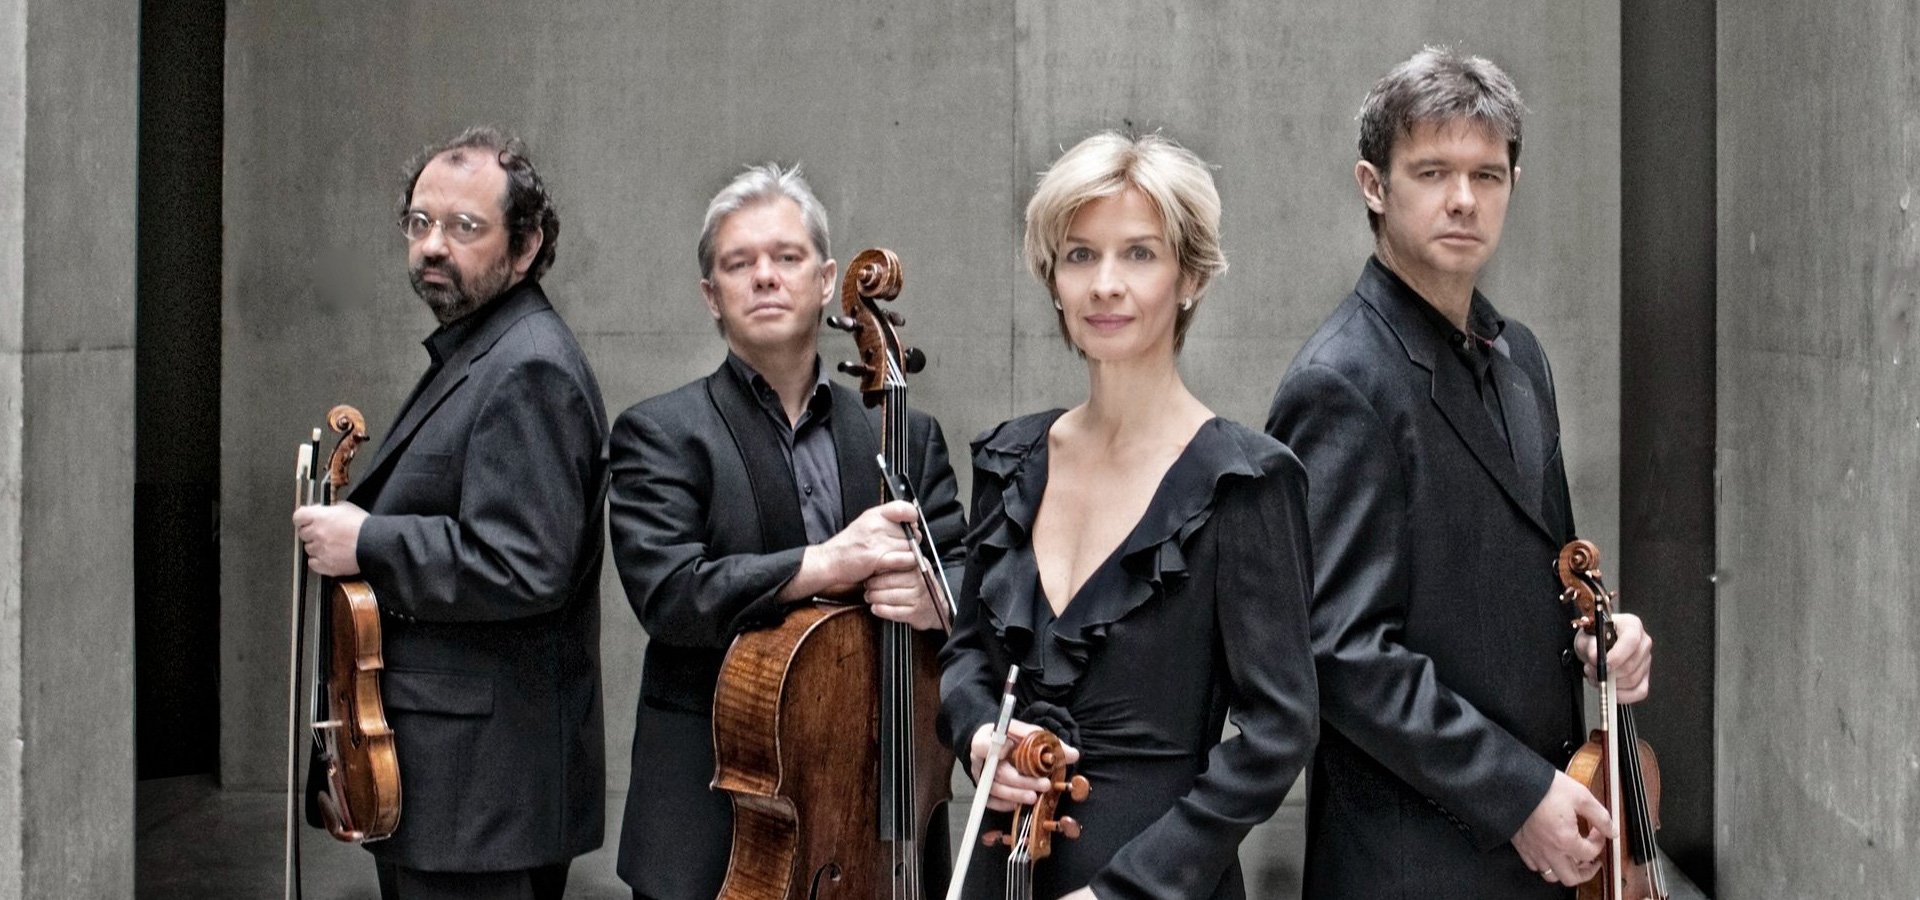 The three men and one woman of the Hagen Quartet stand in front of a concrete background, wearing black formal dress and holding their instruments at waist level.